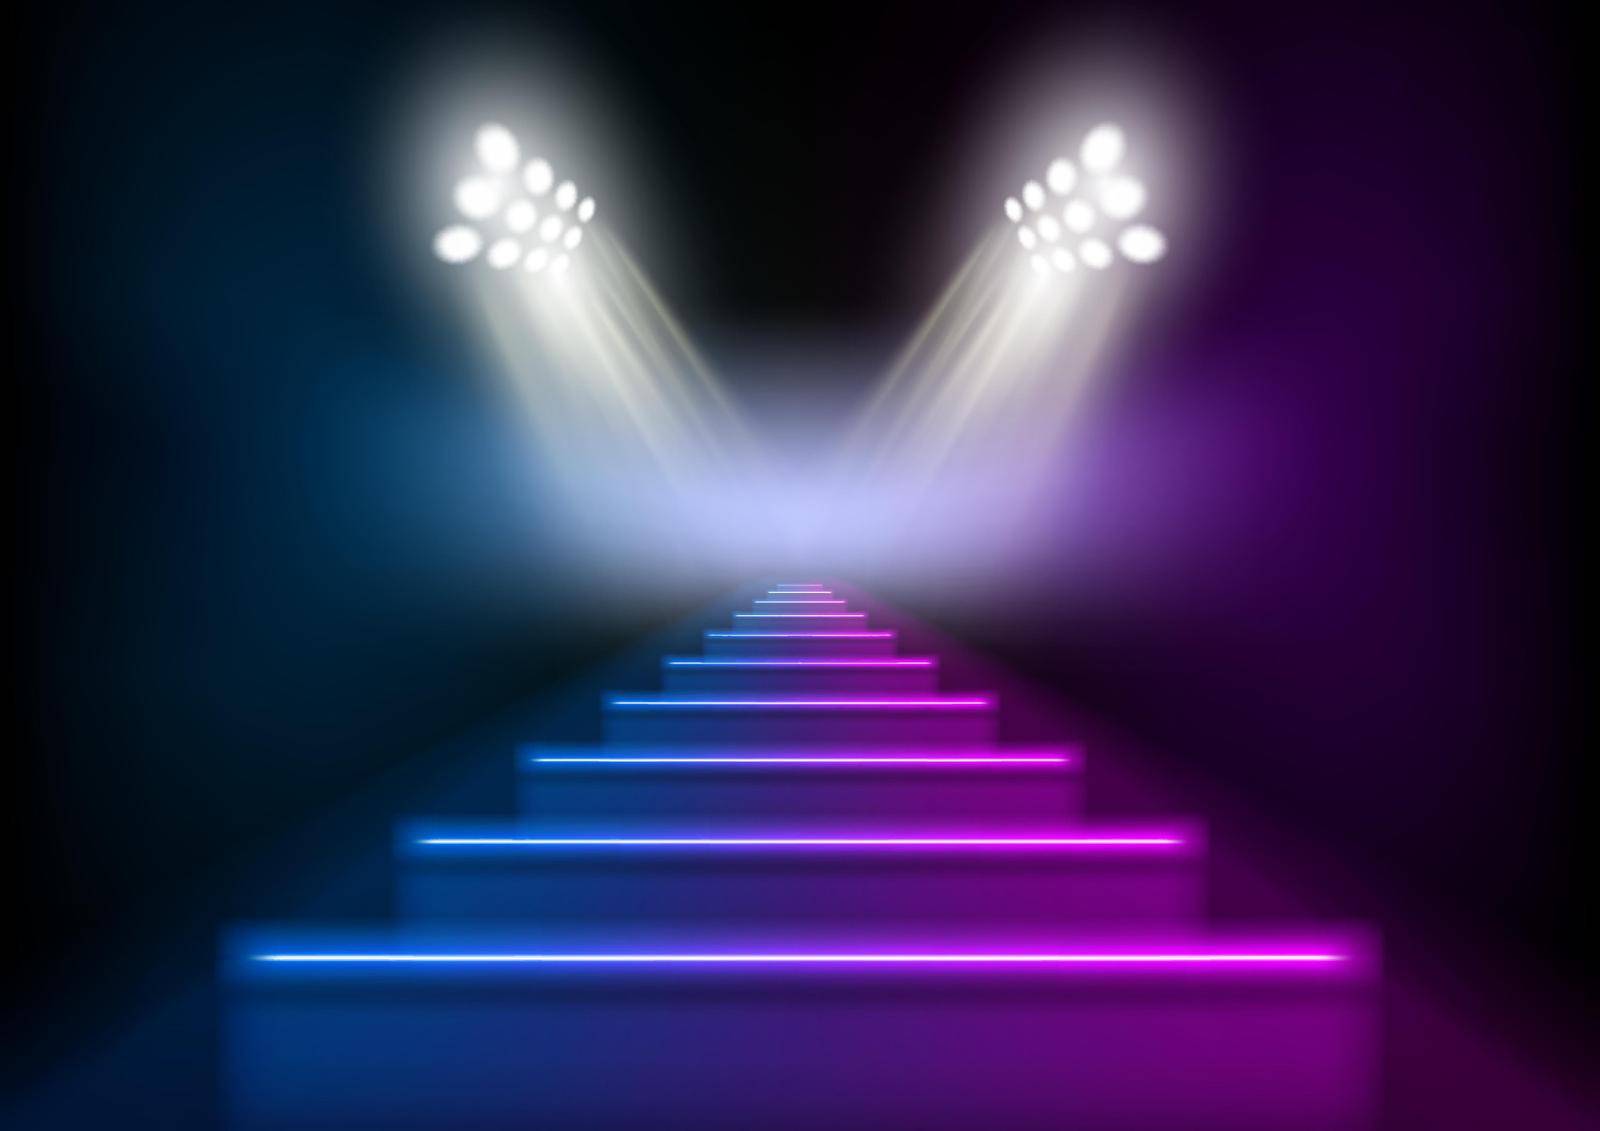 3D Glowing Neon Stairs Illuminated By Spotlights by VectorThings